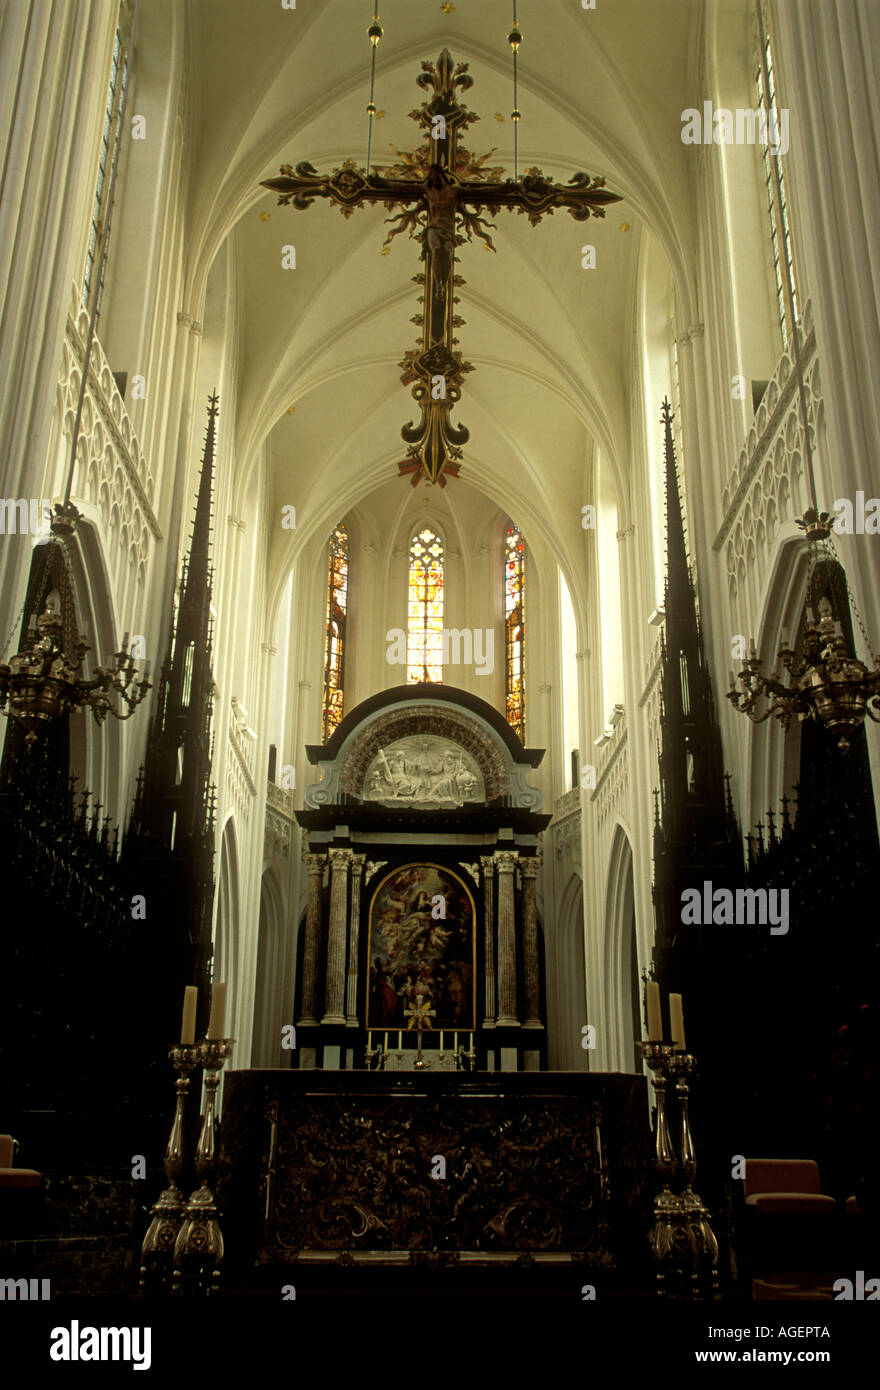 high altar, Cathedral of Our Lady, Roman Catholic cathedral, Roman Catholicism, city of Antwerp, Antwerp, Antwerp Province, Belgium, Europe Stock Photo